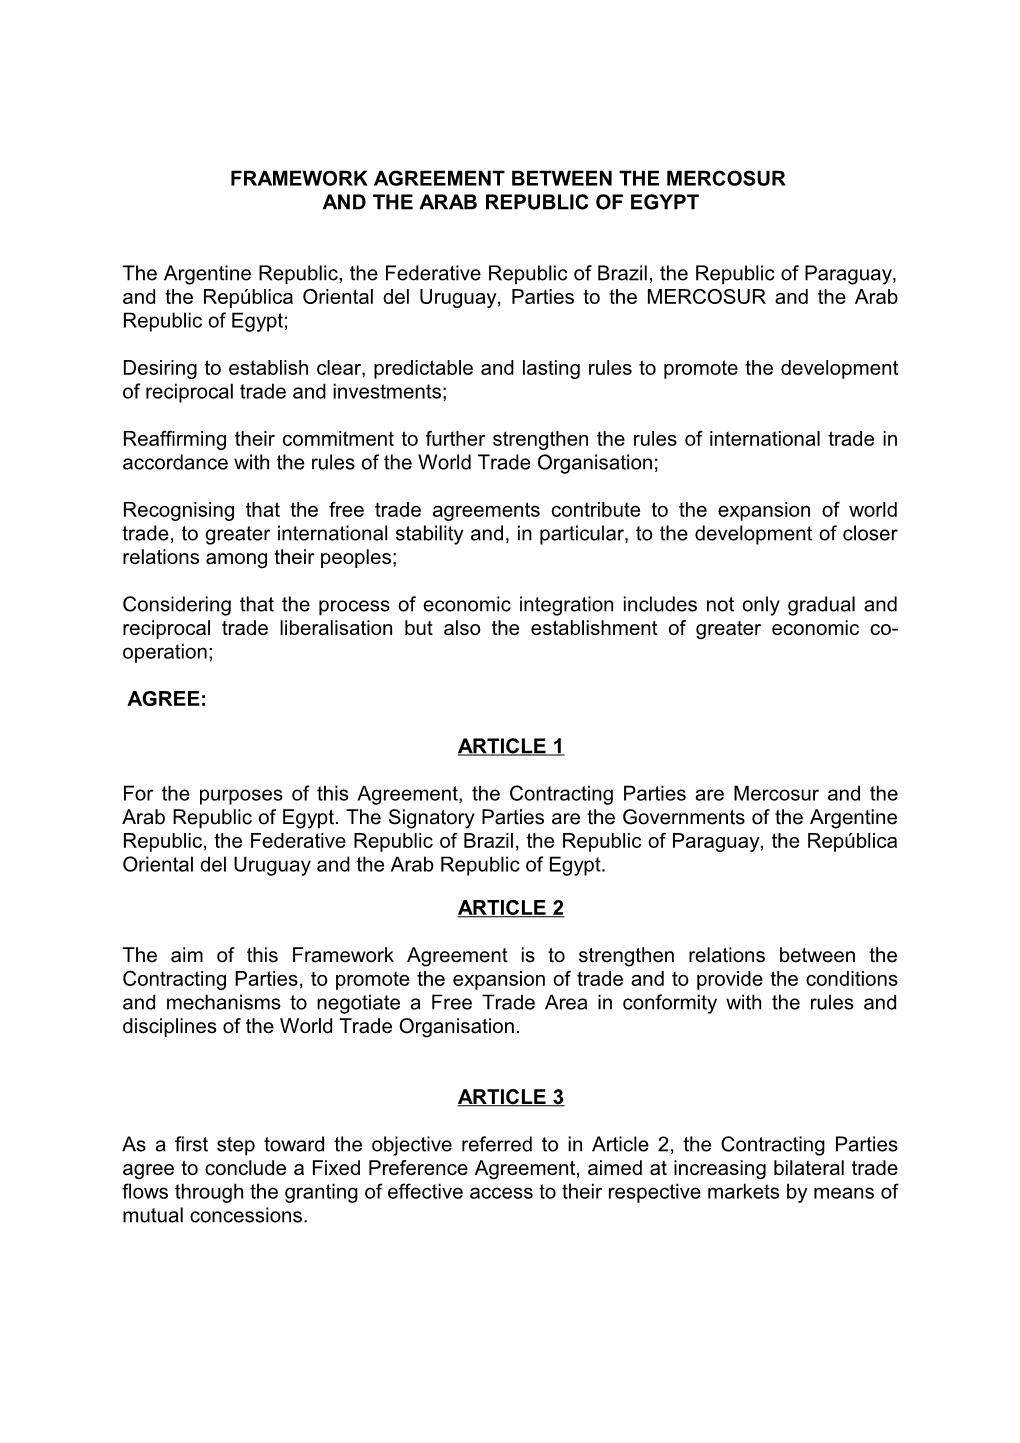 Draft Framework Agreement Between Mercosur and the Republic of South Africa